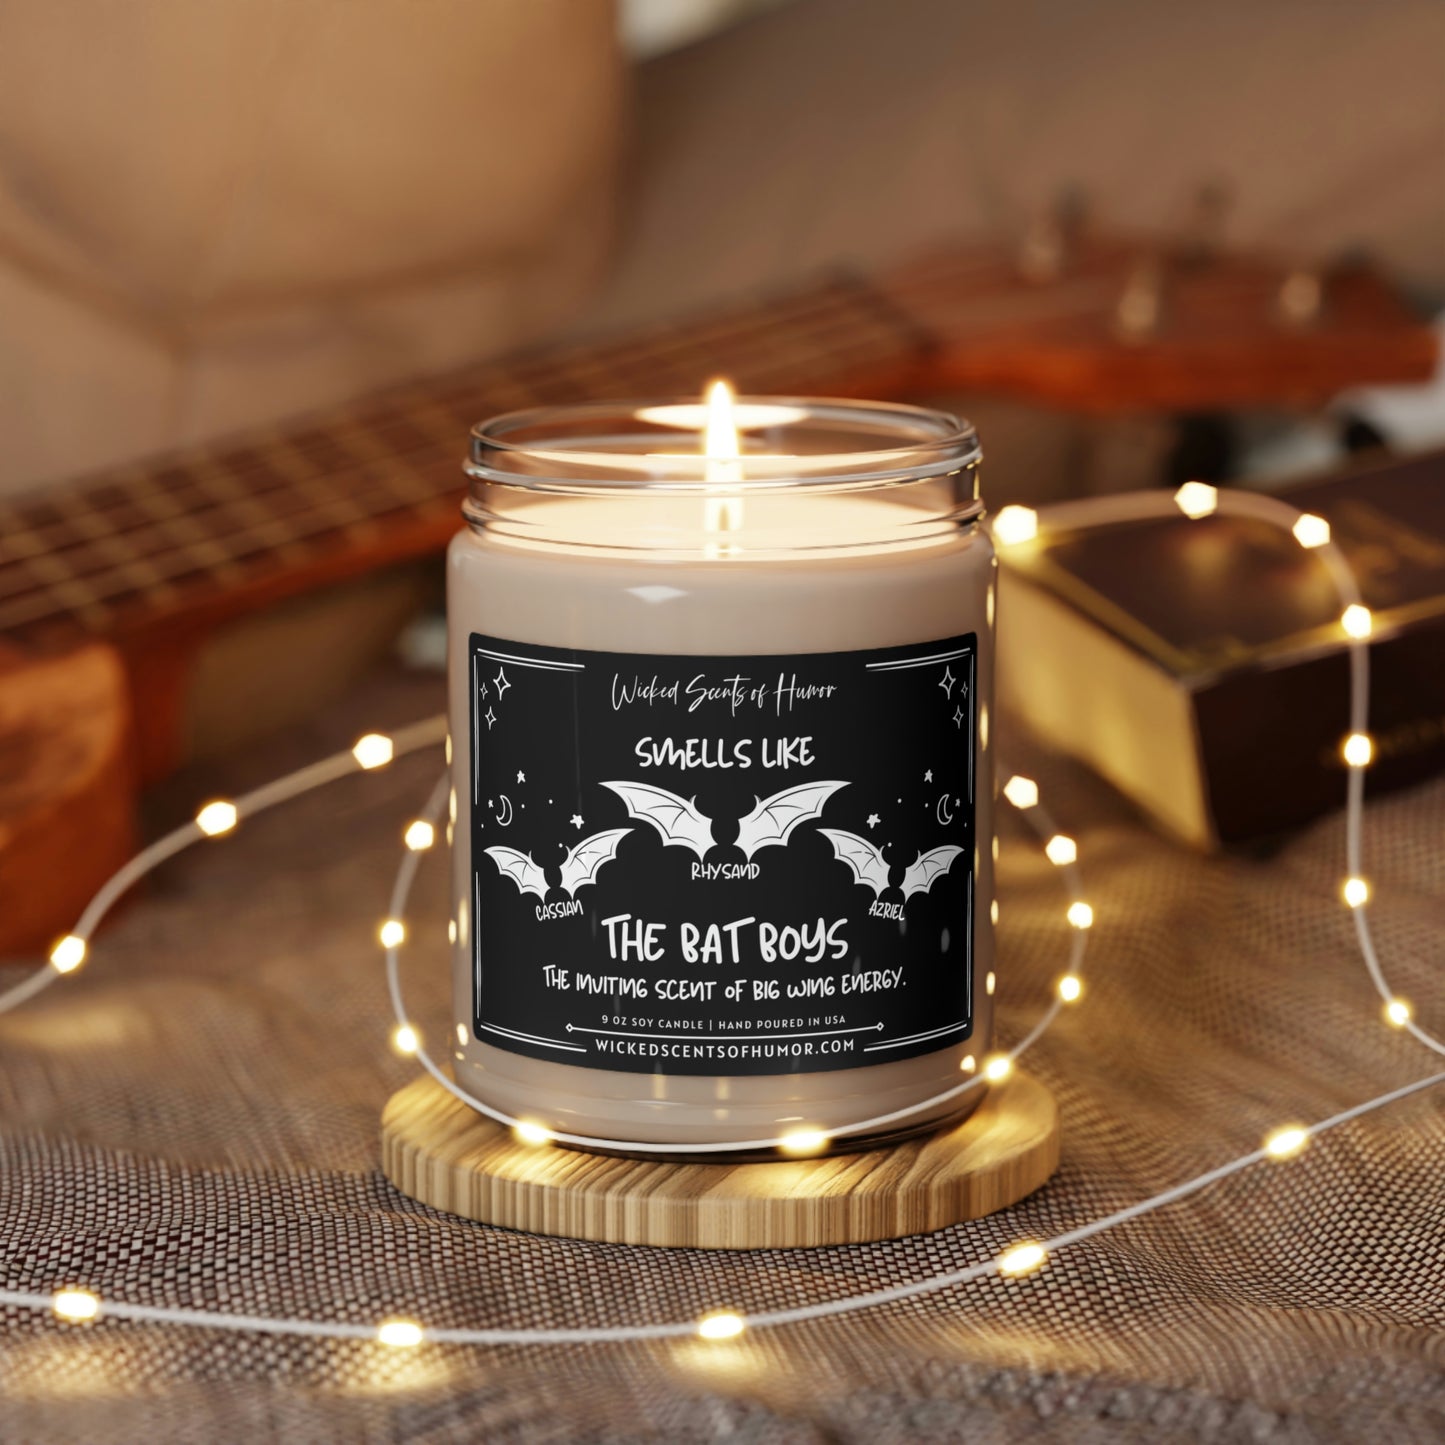 Bat Boys Acotar Candle, Acotar Merch, Rhysand Azriel Cassian, Velaris Candle, ACOMAF, Book Lover Candle, Literary Candle, 9oz Soy Candle